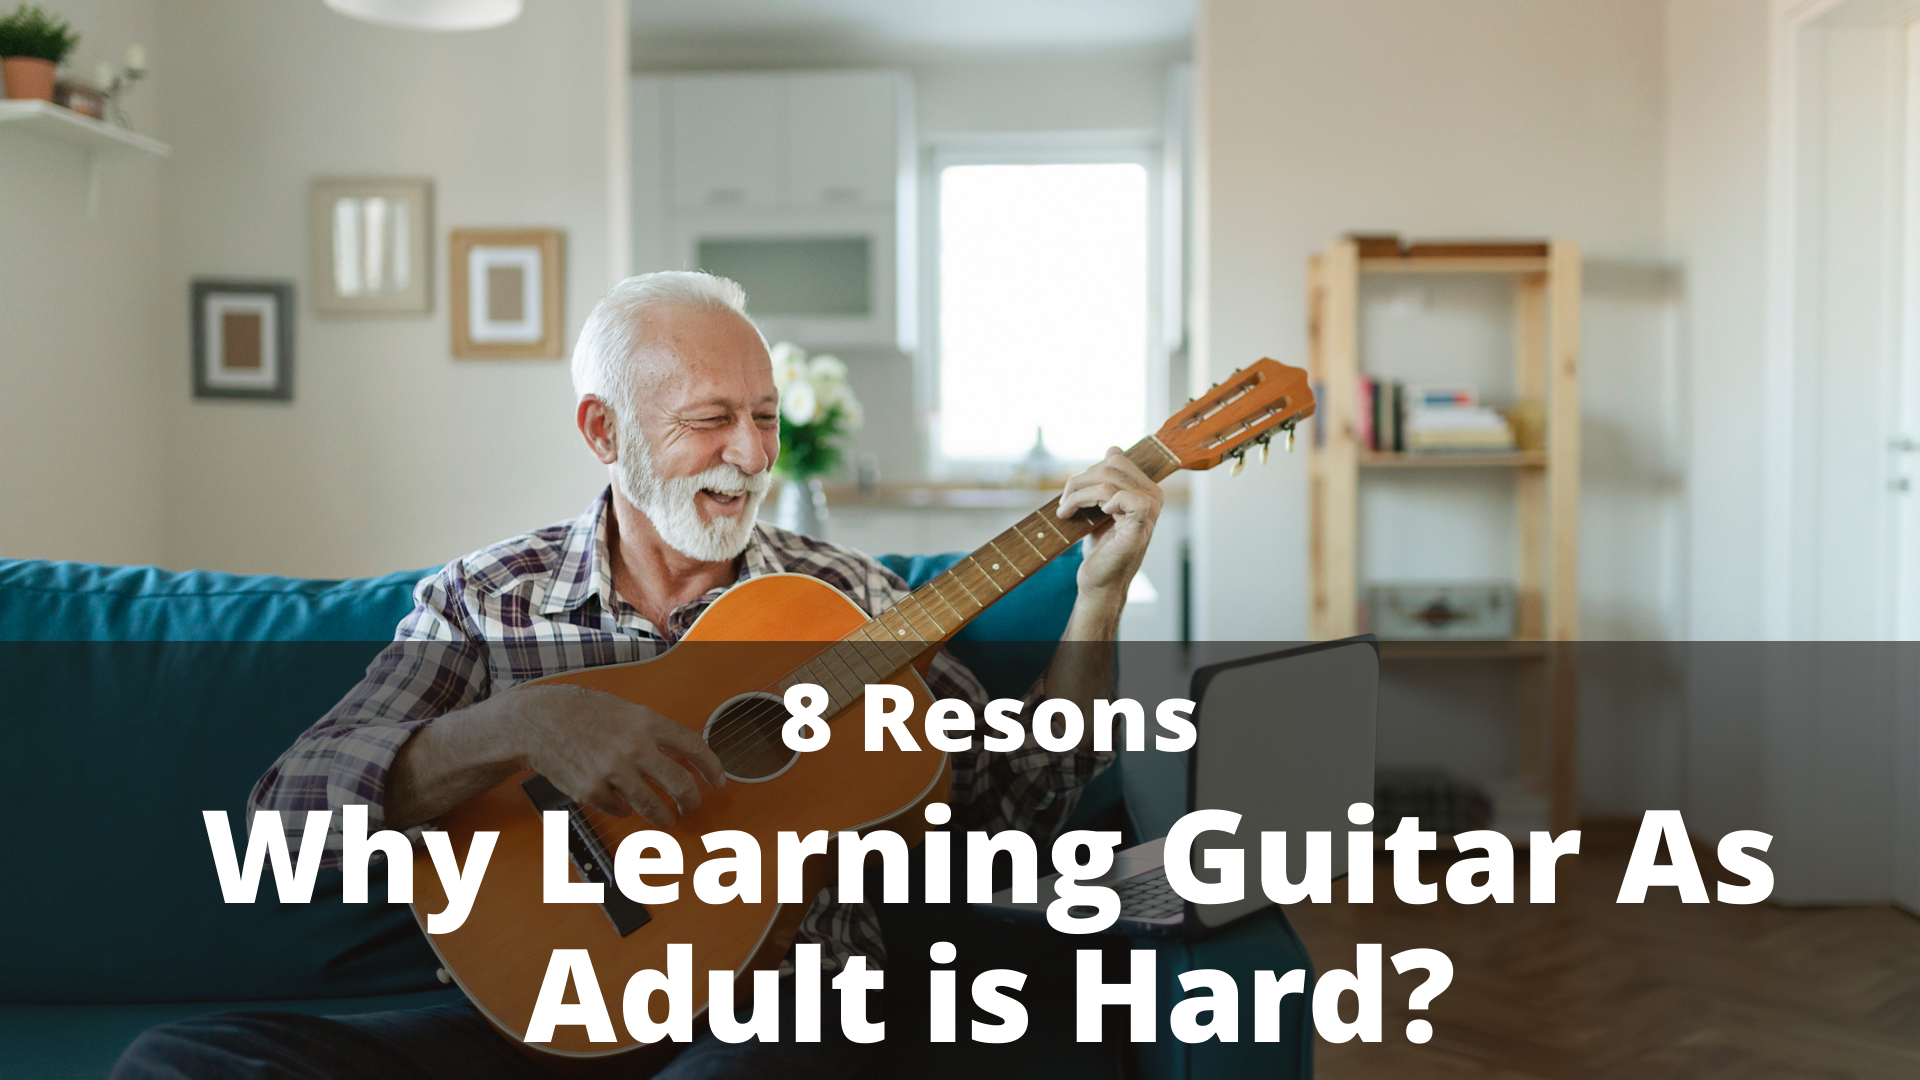 You are currently viewing 8 Reasons Why Learning Guitar as an Adult Can Be Really Hard